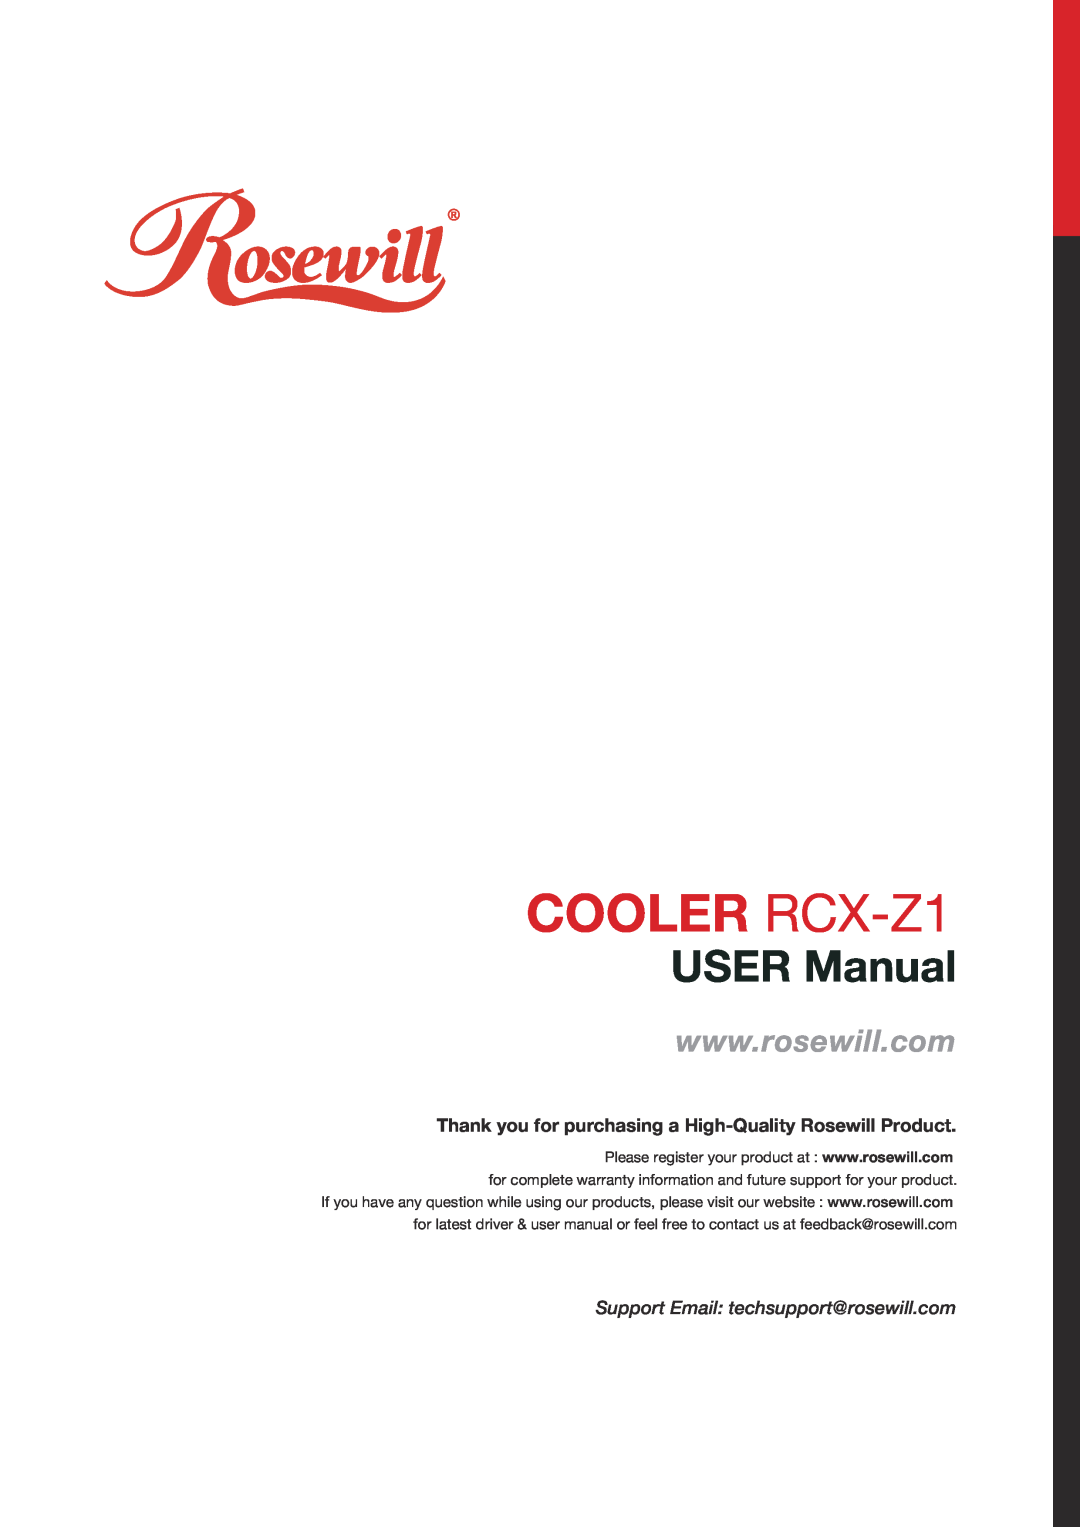 Rosewill user manual COOLER RCX-Z1, USER Manual, Thank you for purchasing a High-Quality Rosewill Product 